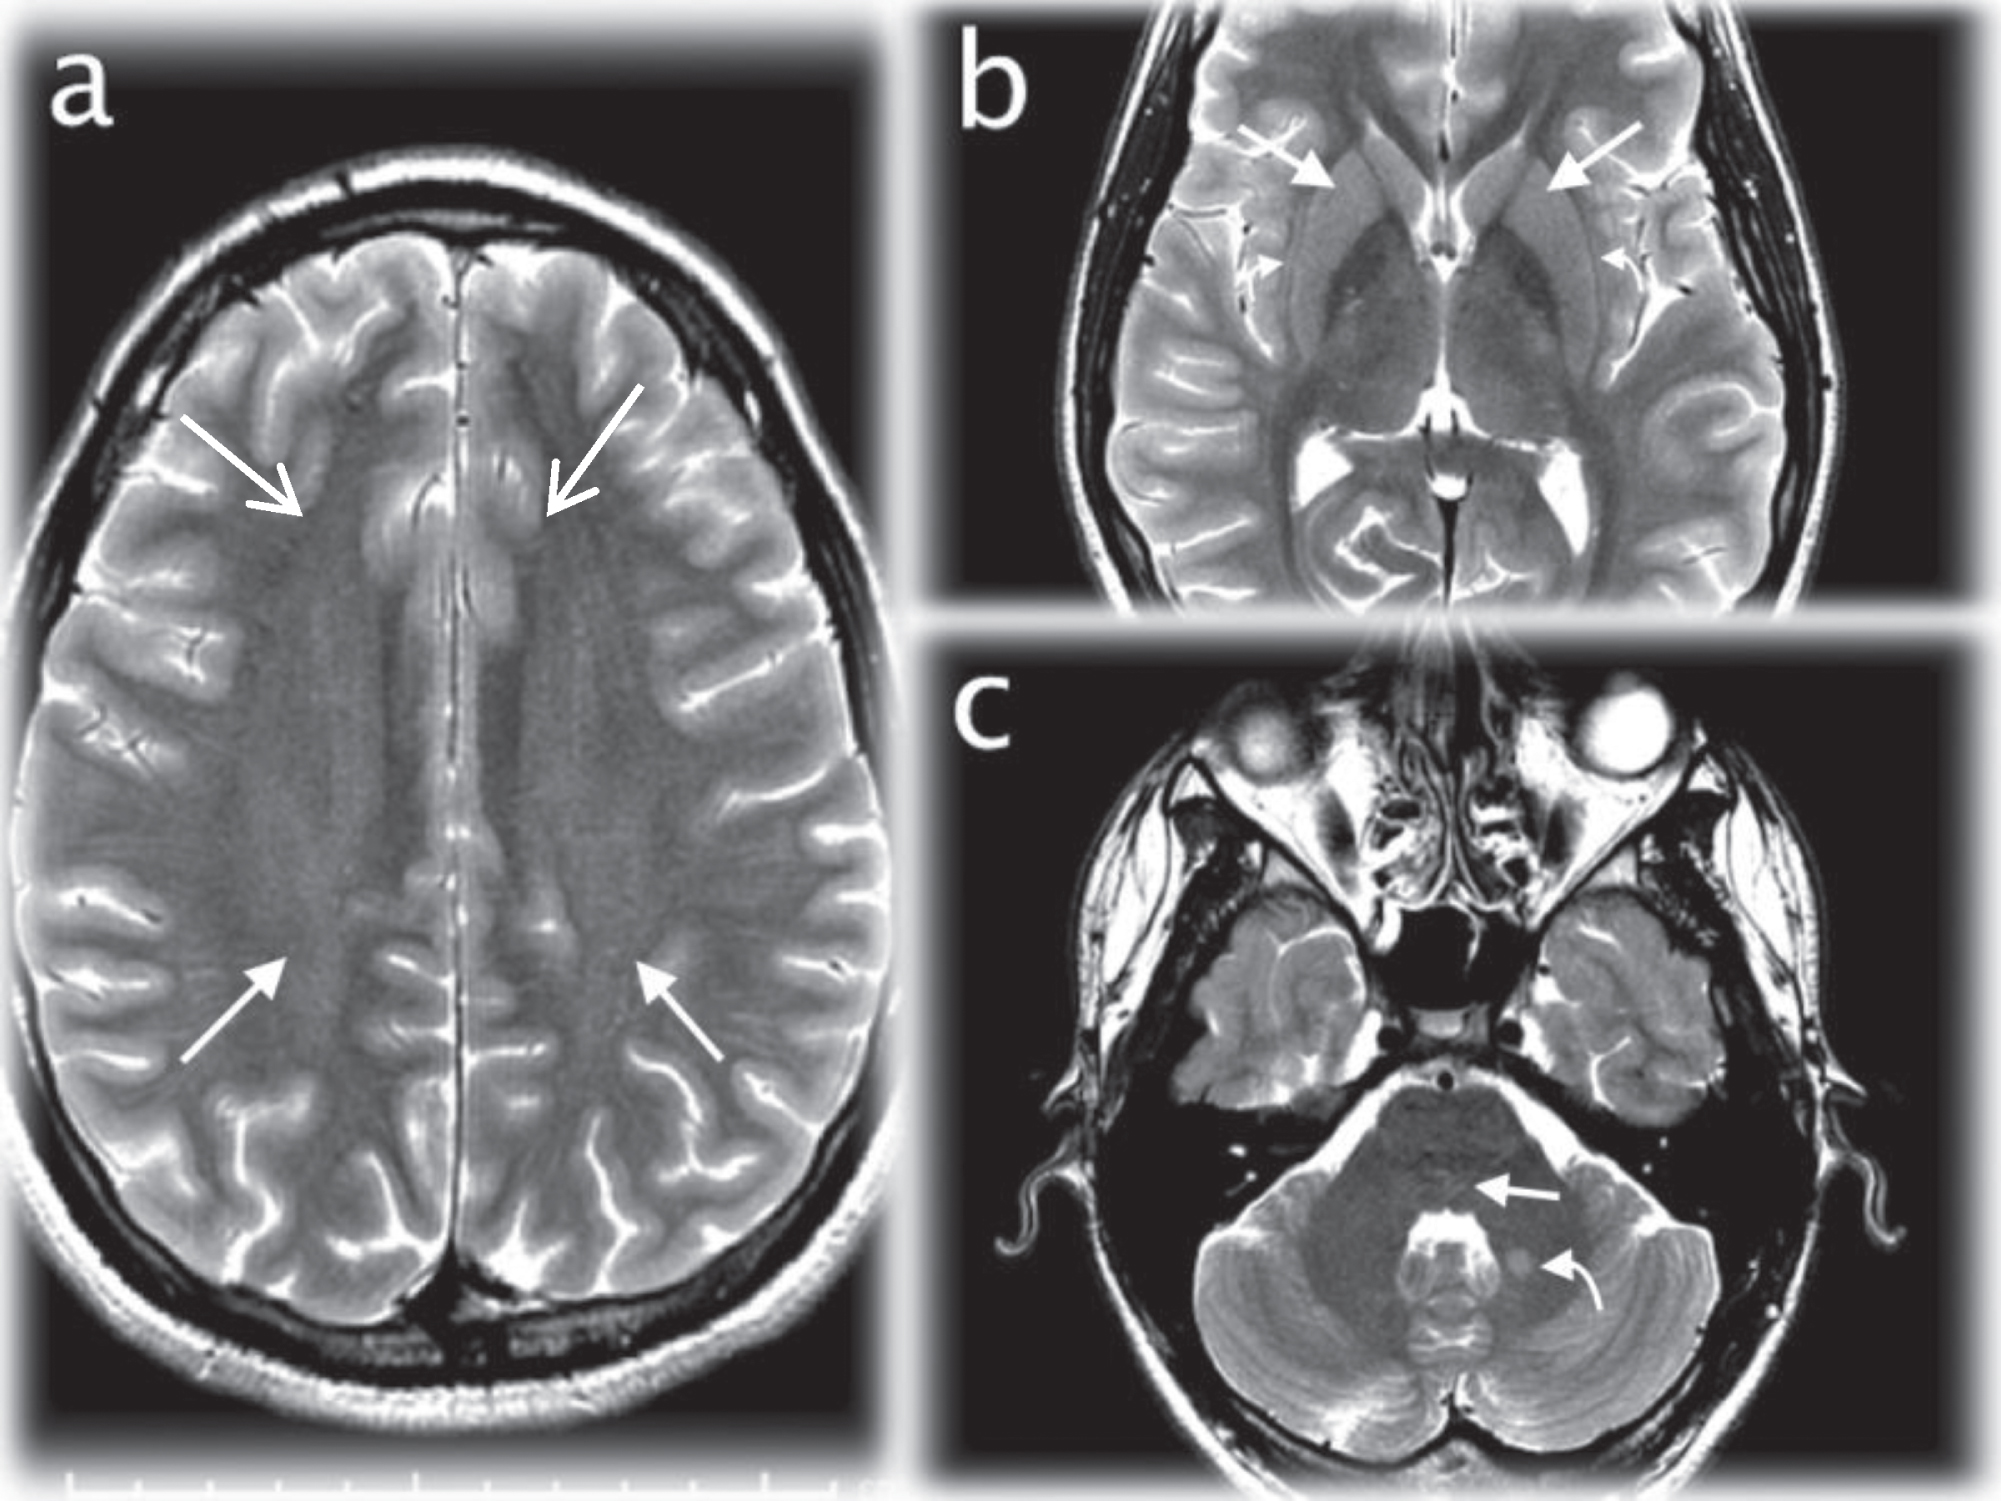 Initial brain MRI performed 10 days after admission. Axial T2WI (TR/TE msec, 3200/102) demonstrating increased signal in the frontoparietal white matter (arrows; a), basal ganglia (arrows; b), claustrum (curved arrows; b), pontine tegmentum (arrow; c), and left brachium pontis (curved arrow; c).